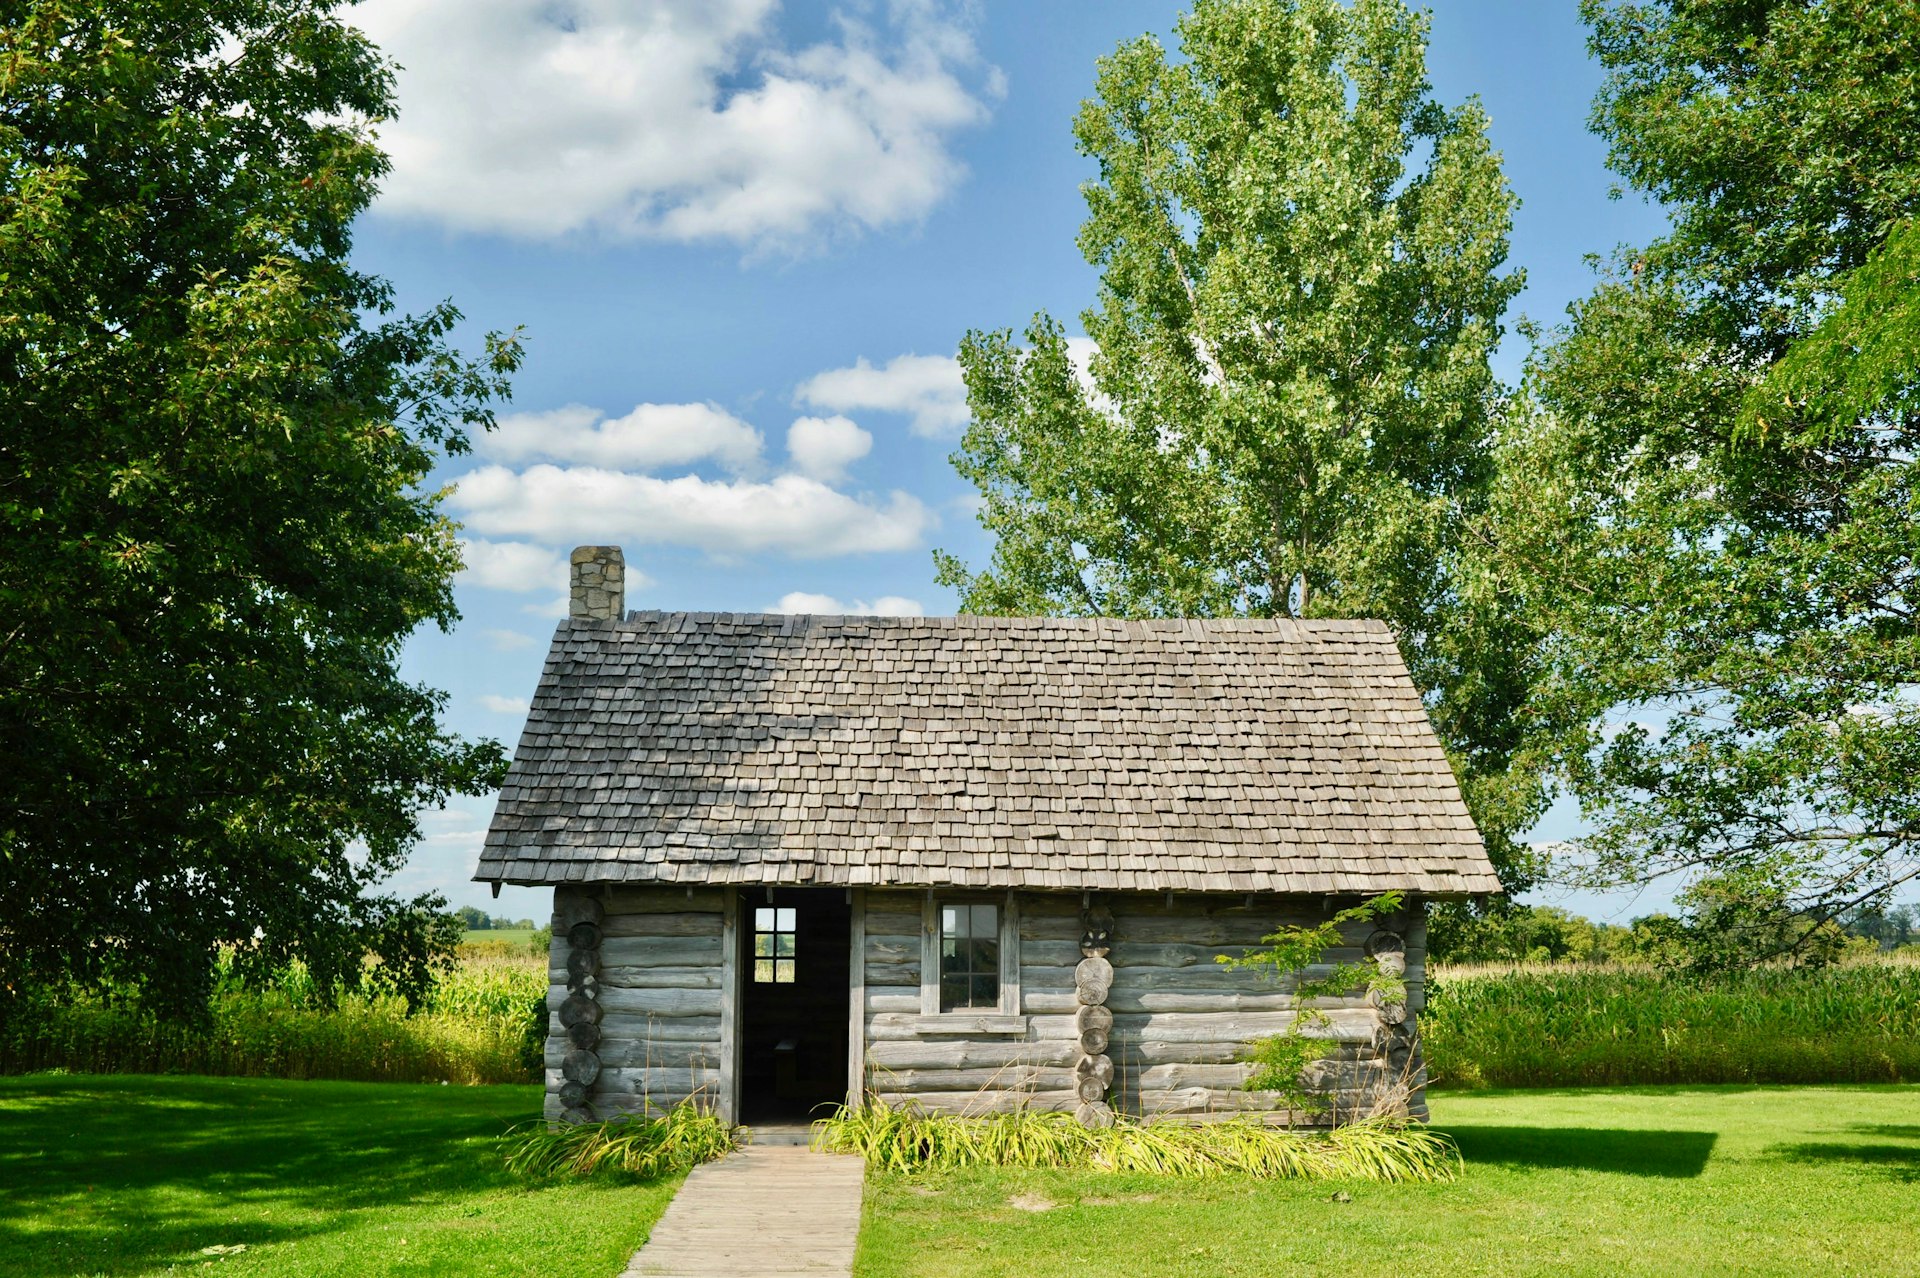 Log cabin replica at the site of Laura Ingalls Wilder's birthplace, setting for book Little House in the Big Woods, Pepin, Wisconsin, USA